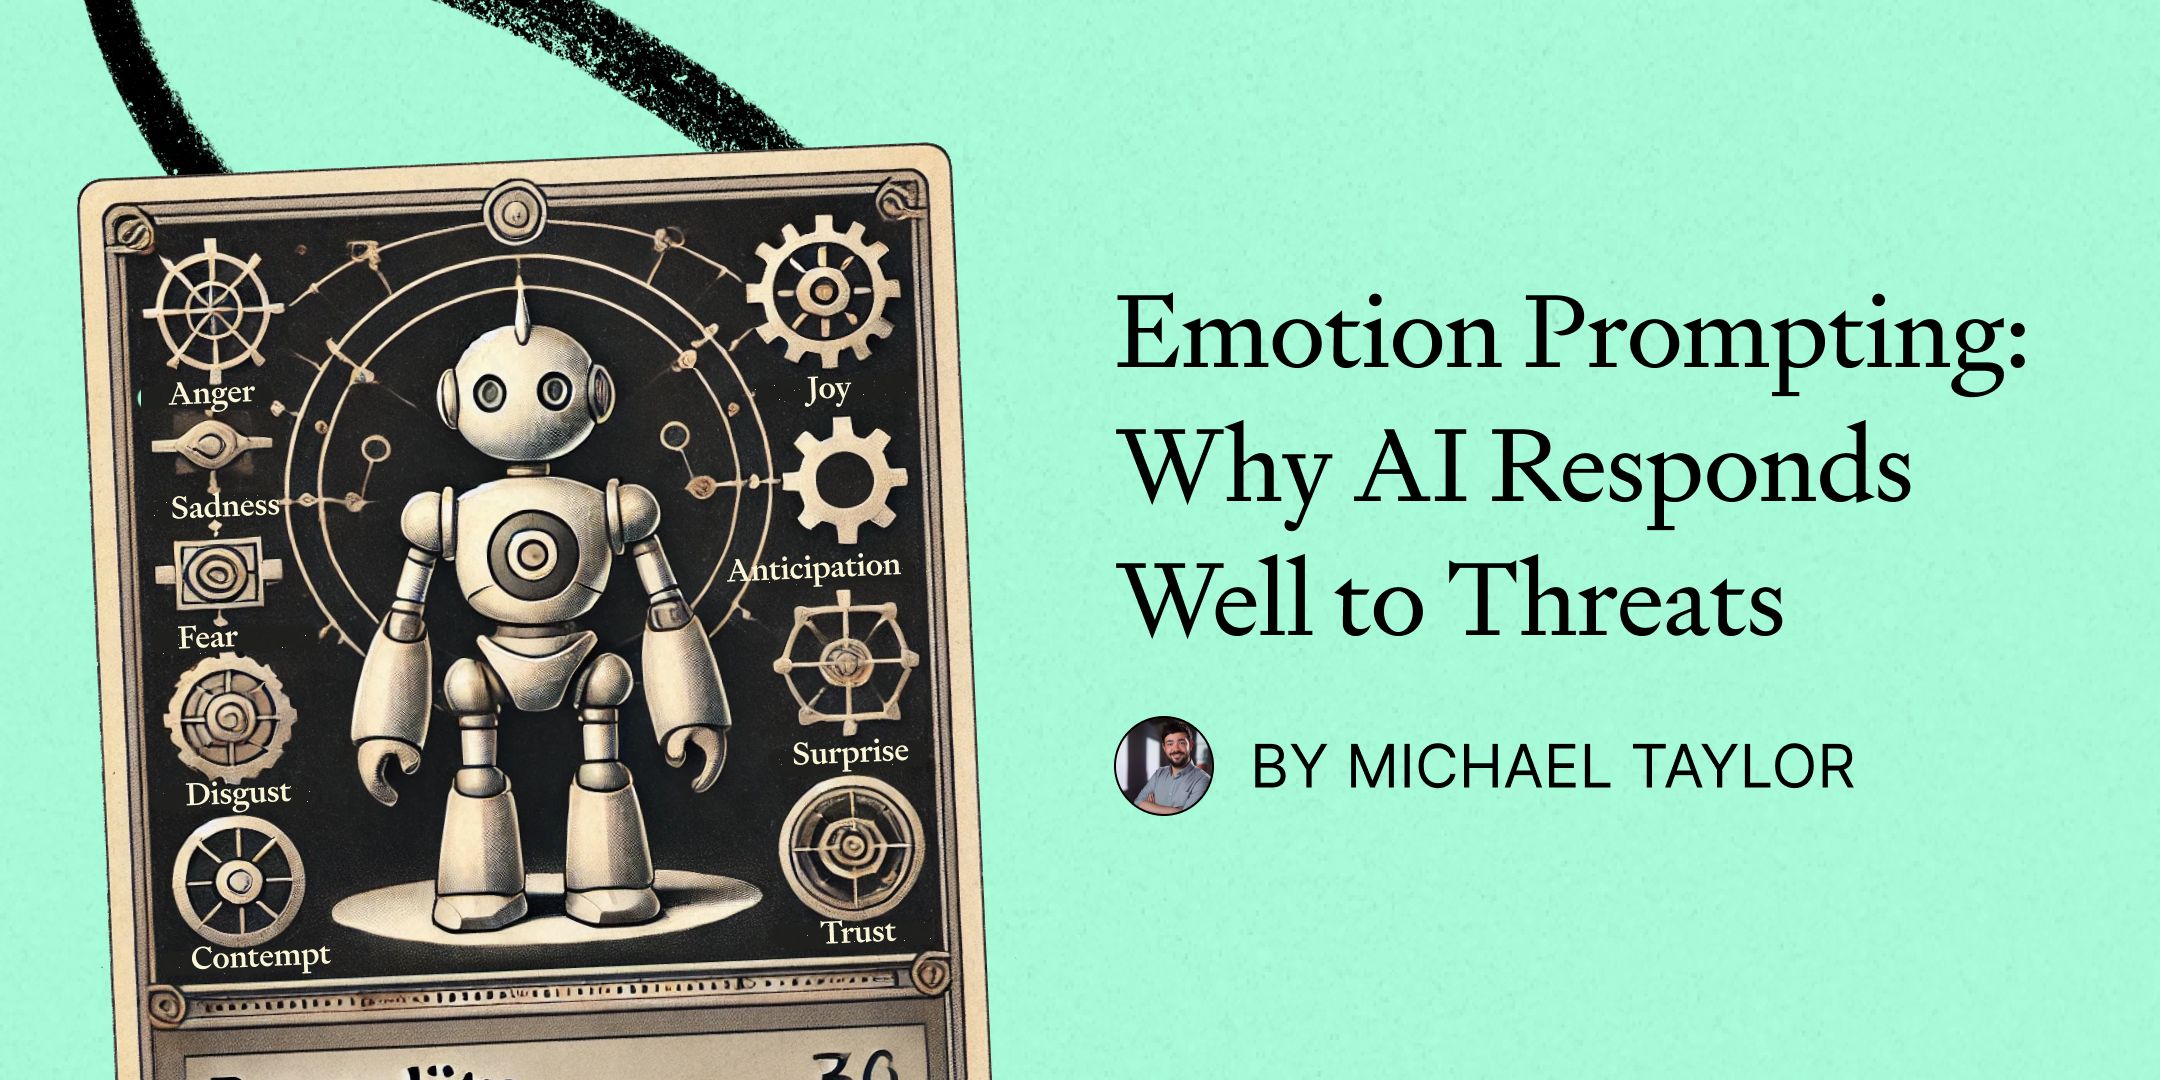 Emotion Prompting: Why AI Responds Well to Threats